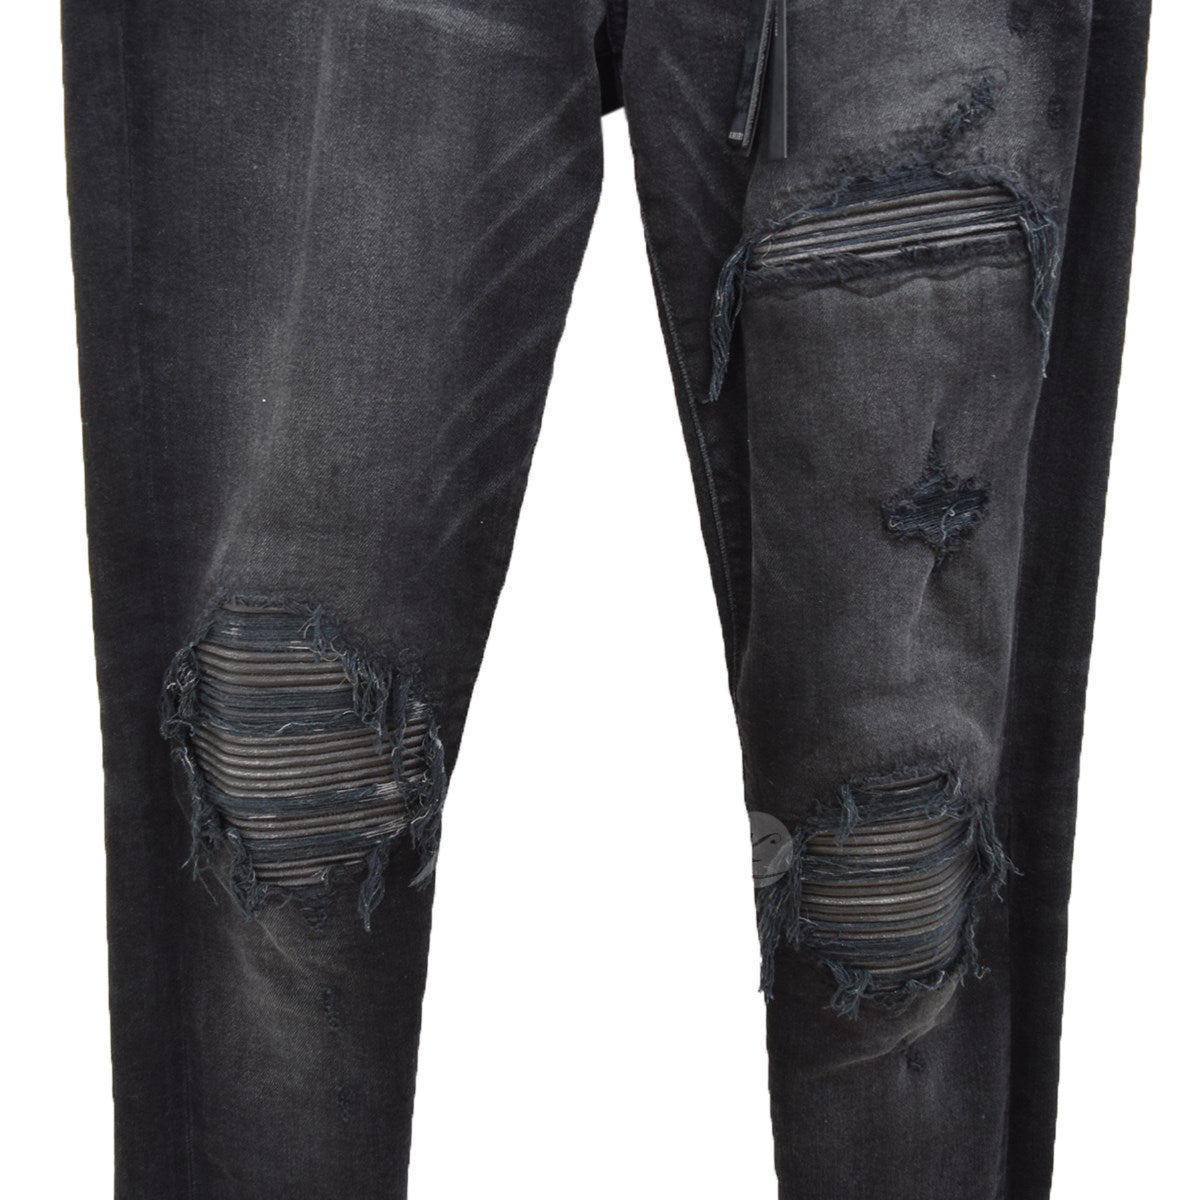 MX1 LEATHER PATCH JEANS レザーパッチ クラッシュデニム